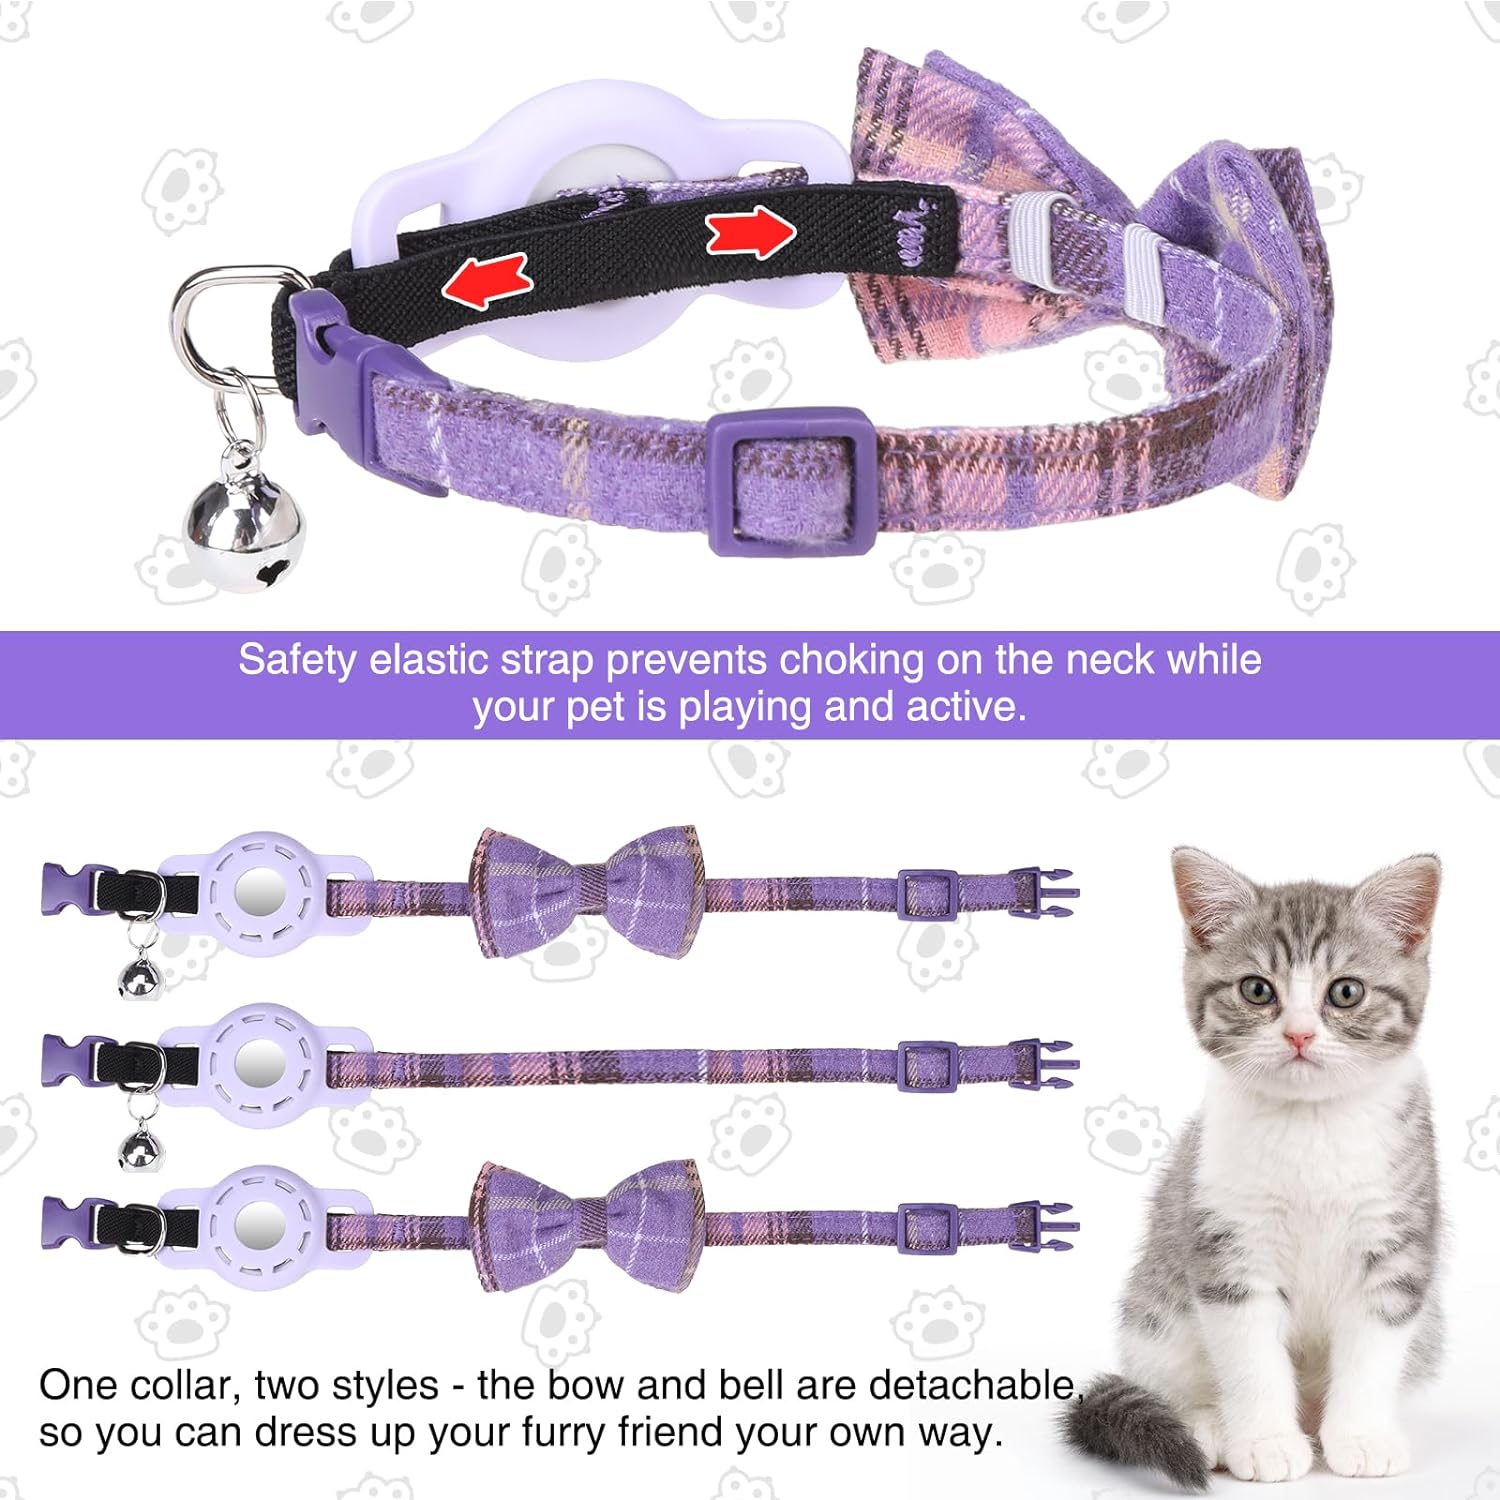 DILLYBUD Airtag Cat Collar, Plaid Cat Collar with Bow Tie and Bell, Adjustable Breakaway Pet Collar for Puppy Kitten Girl and Boys, GPS Tracker Cat Collars, Purple